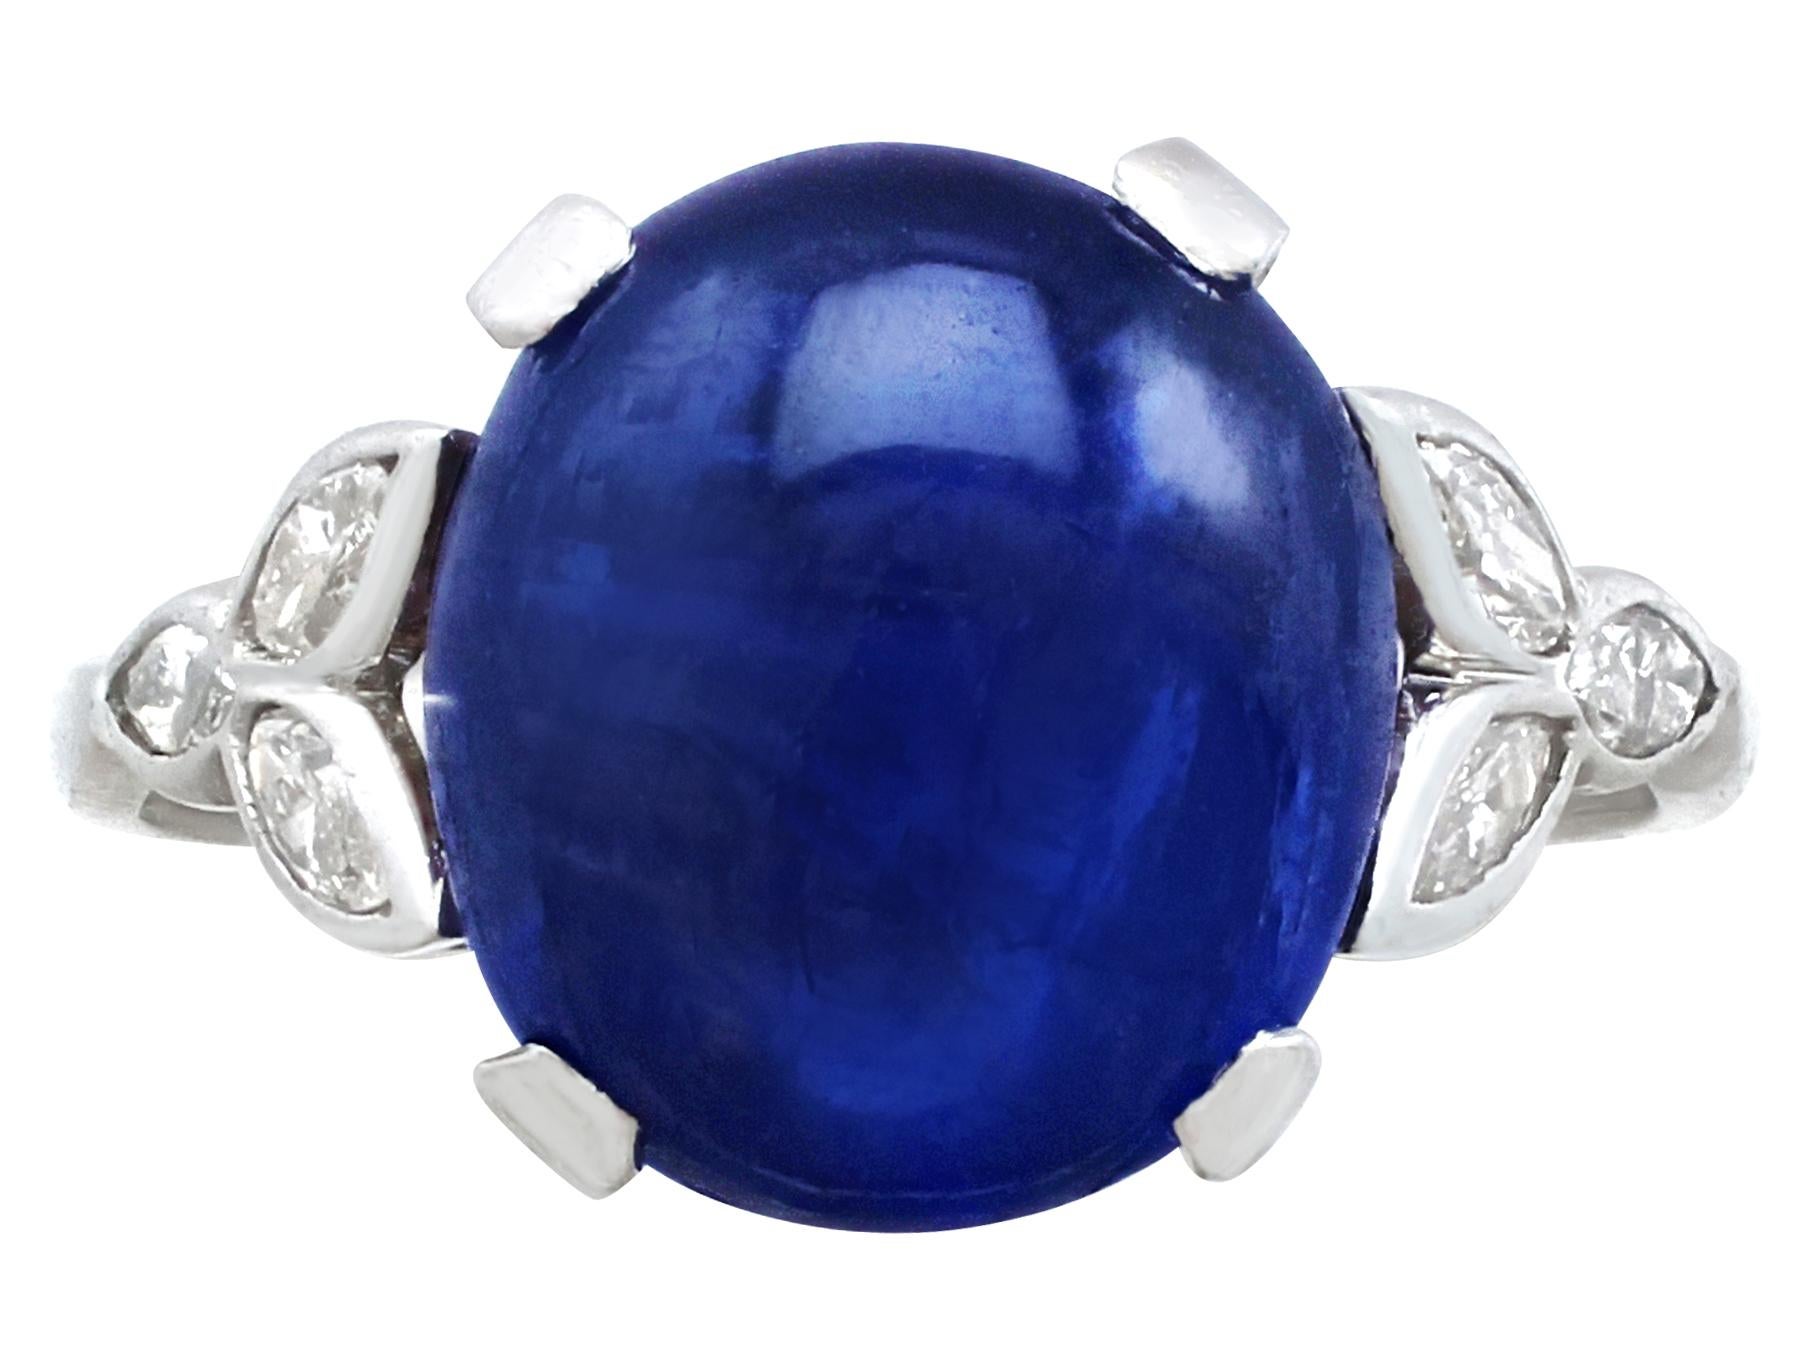 Antique 1930s 6.80 Ct Cabochon Cut Sapphire and Diamond Platinum Cocktail Ring In Excellent Condition For Sale In Jesmond, Newcastle Upon Tyne